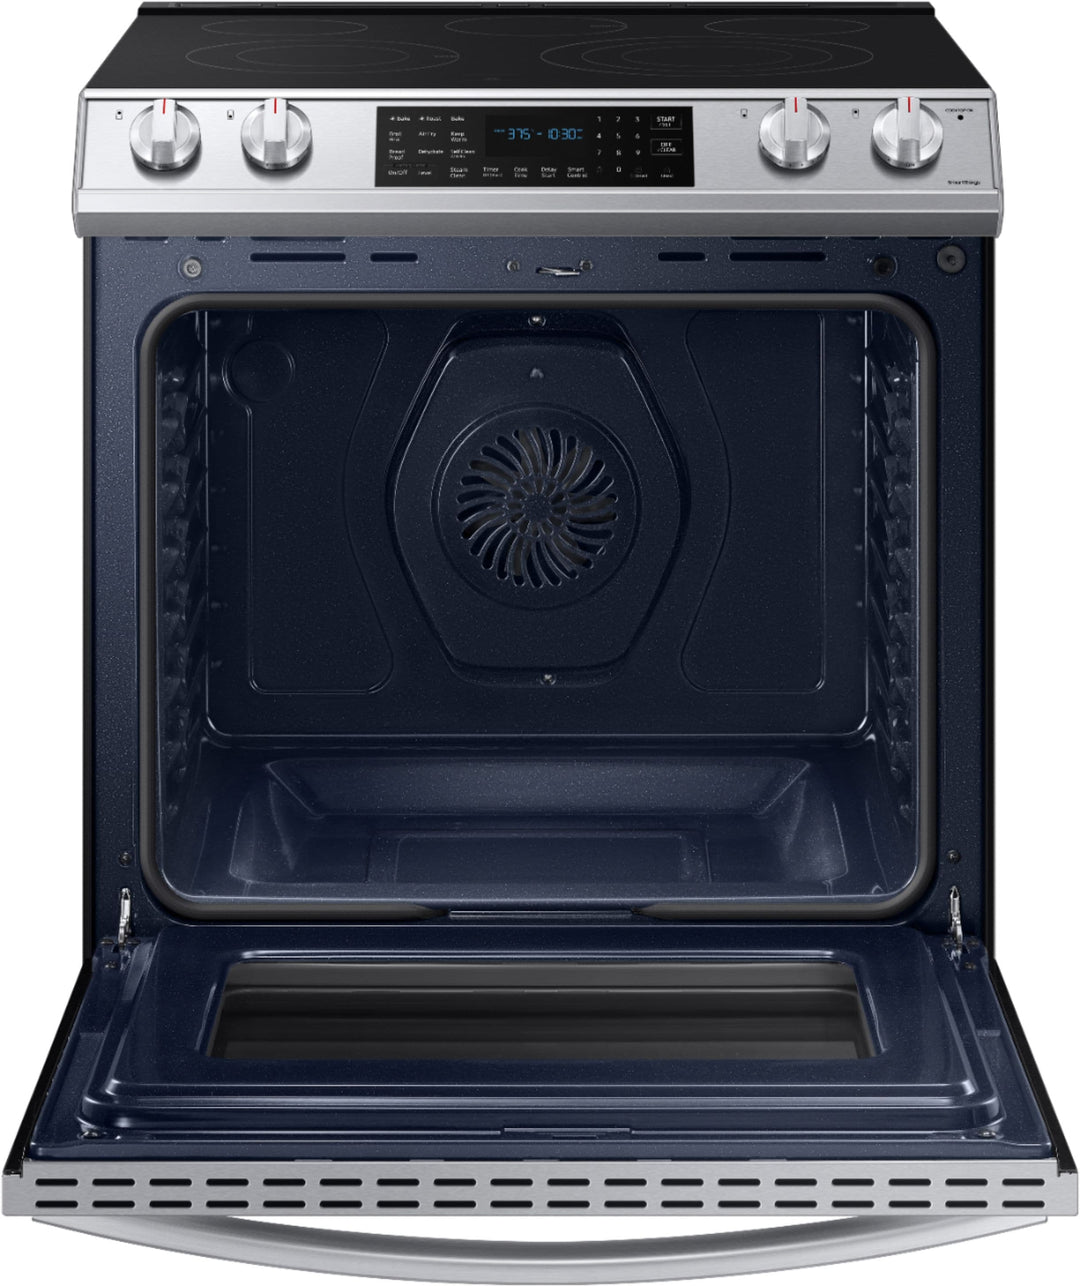 Samsung - 6.3 cu. ft. Front Control Slide-In Electric Convection Range with Air Fry & Wi-Fi, Fingerprint Resistant - Stainless steel_12